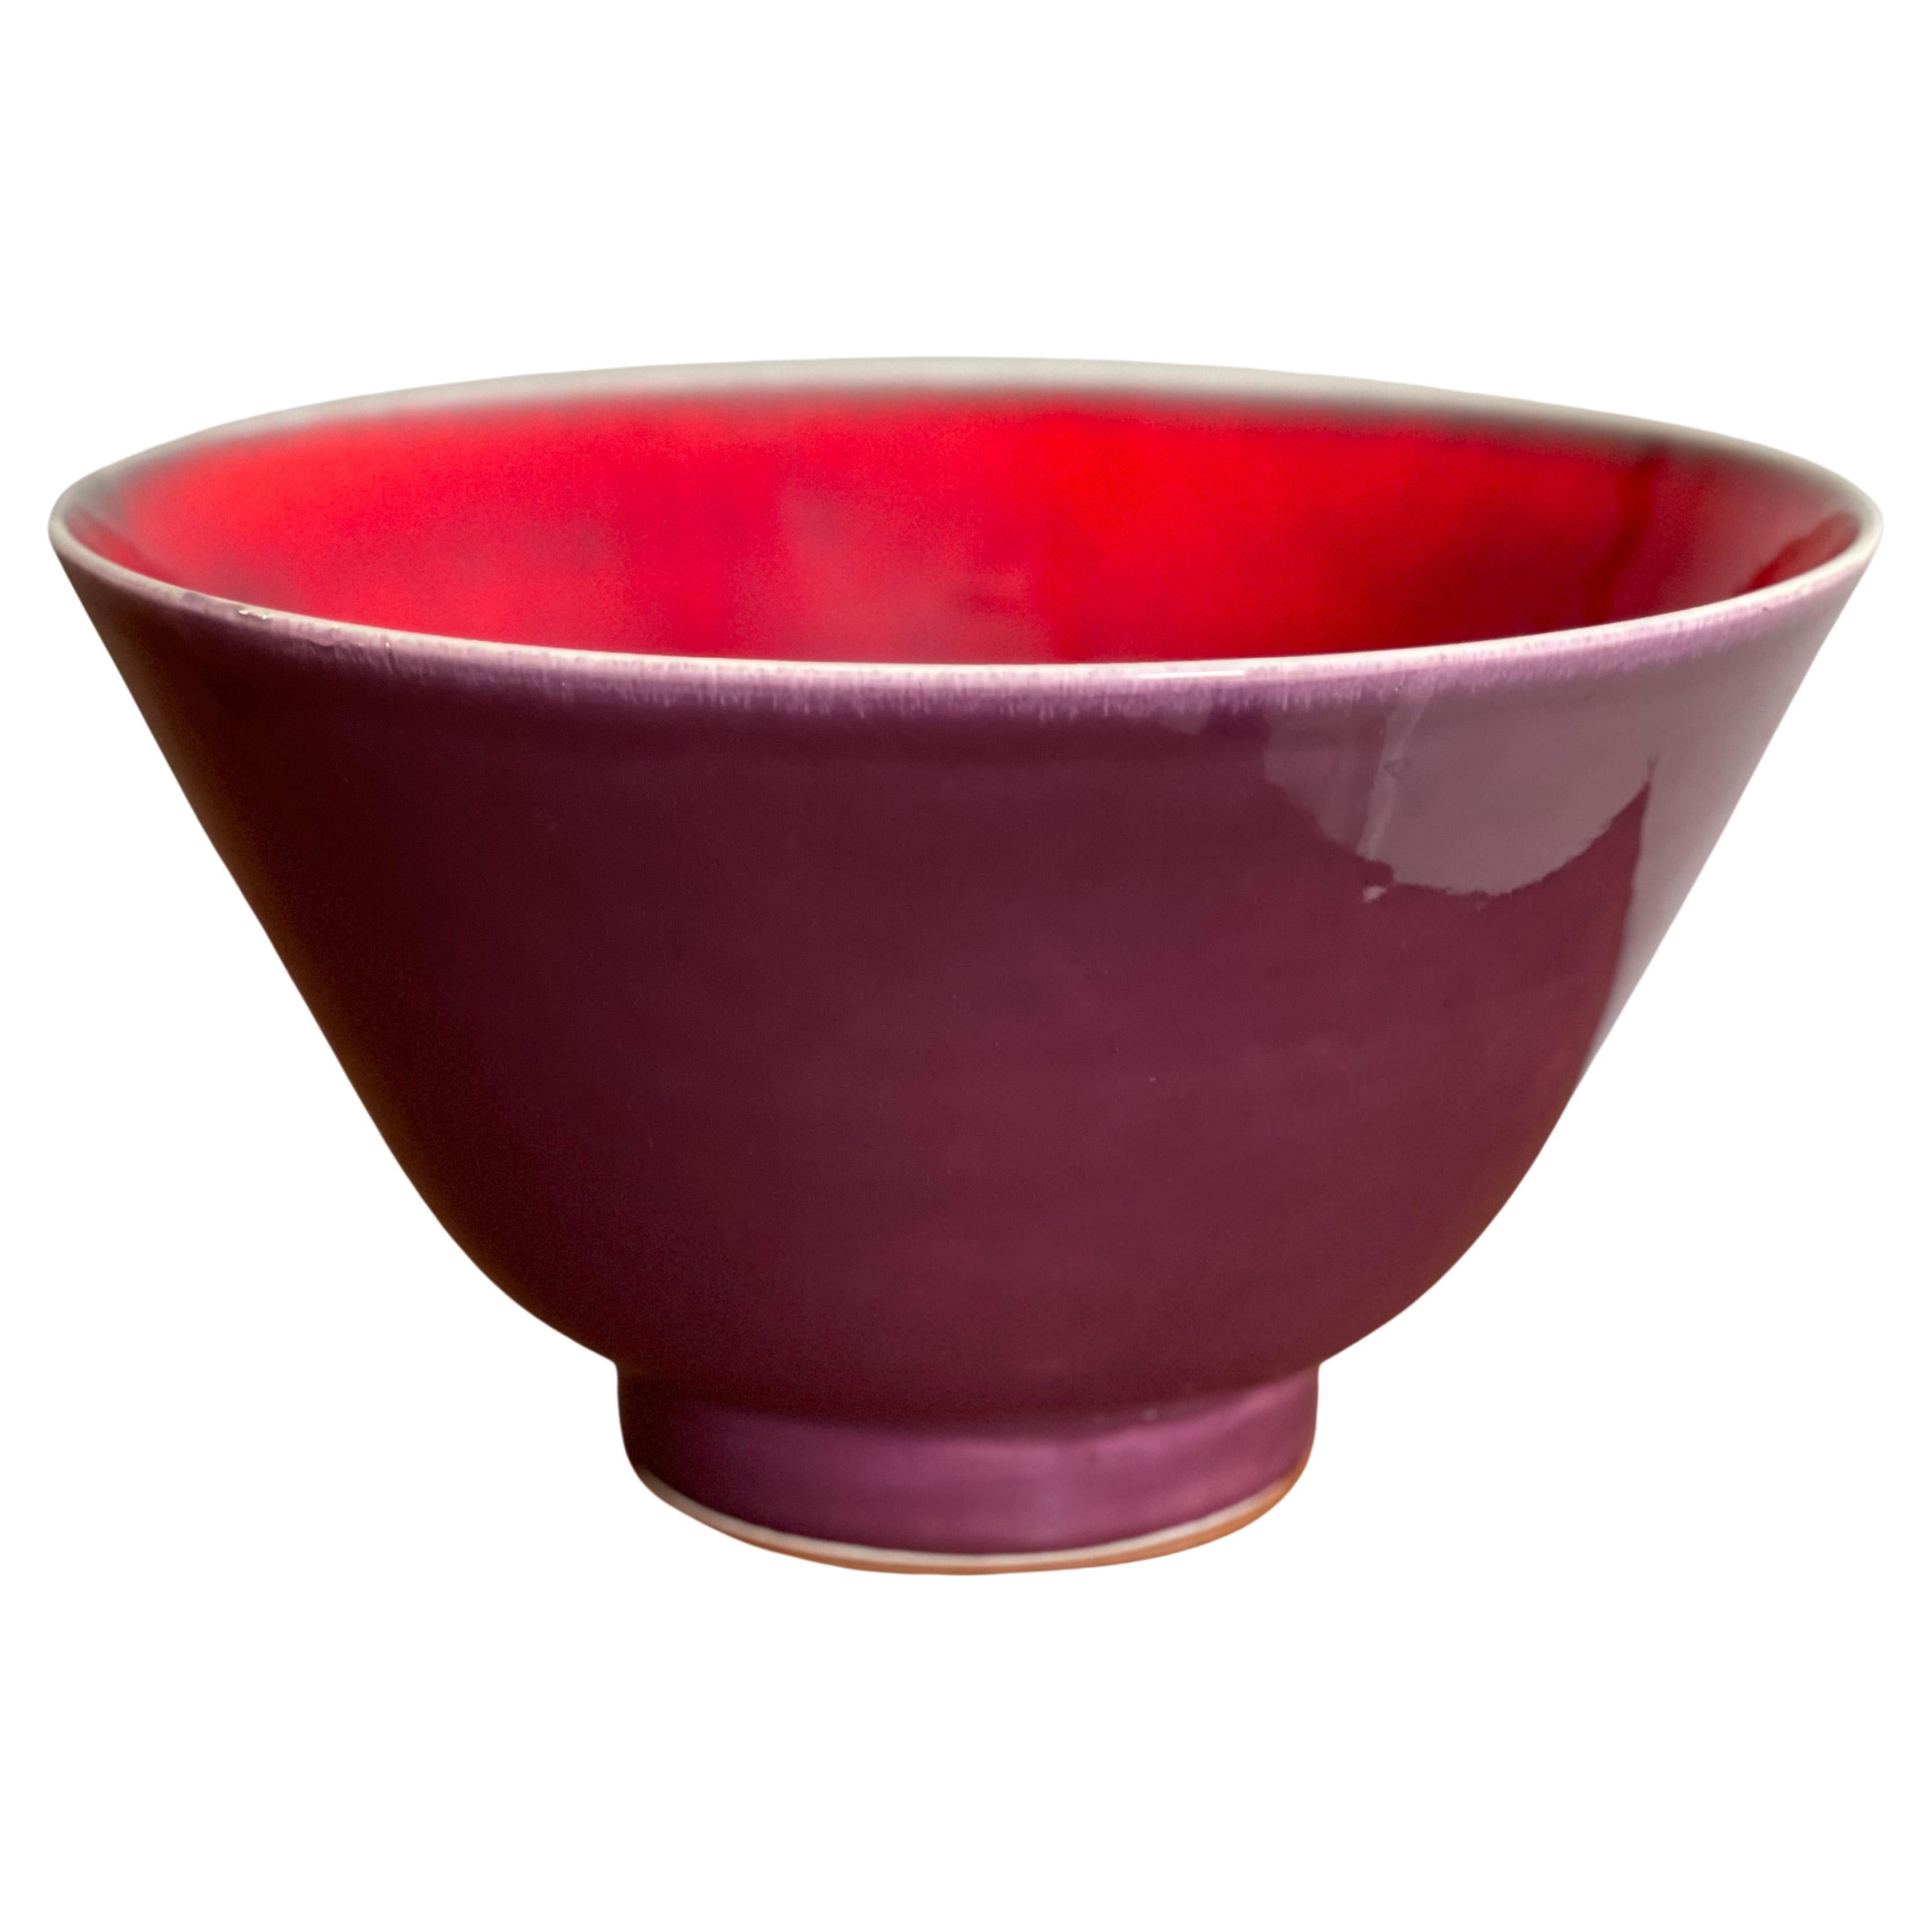 Large Serving Centerpiece Ceramic Bowl by Alvino Bagni for Raymor